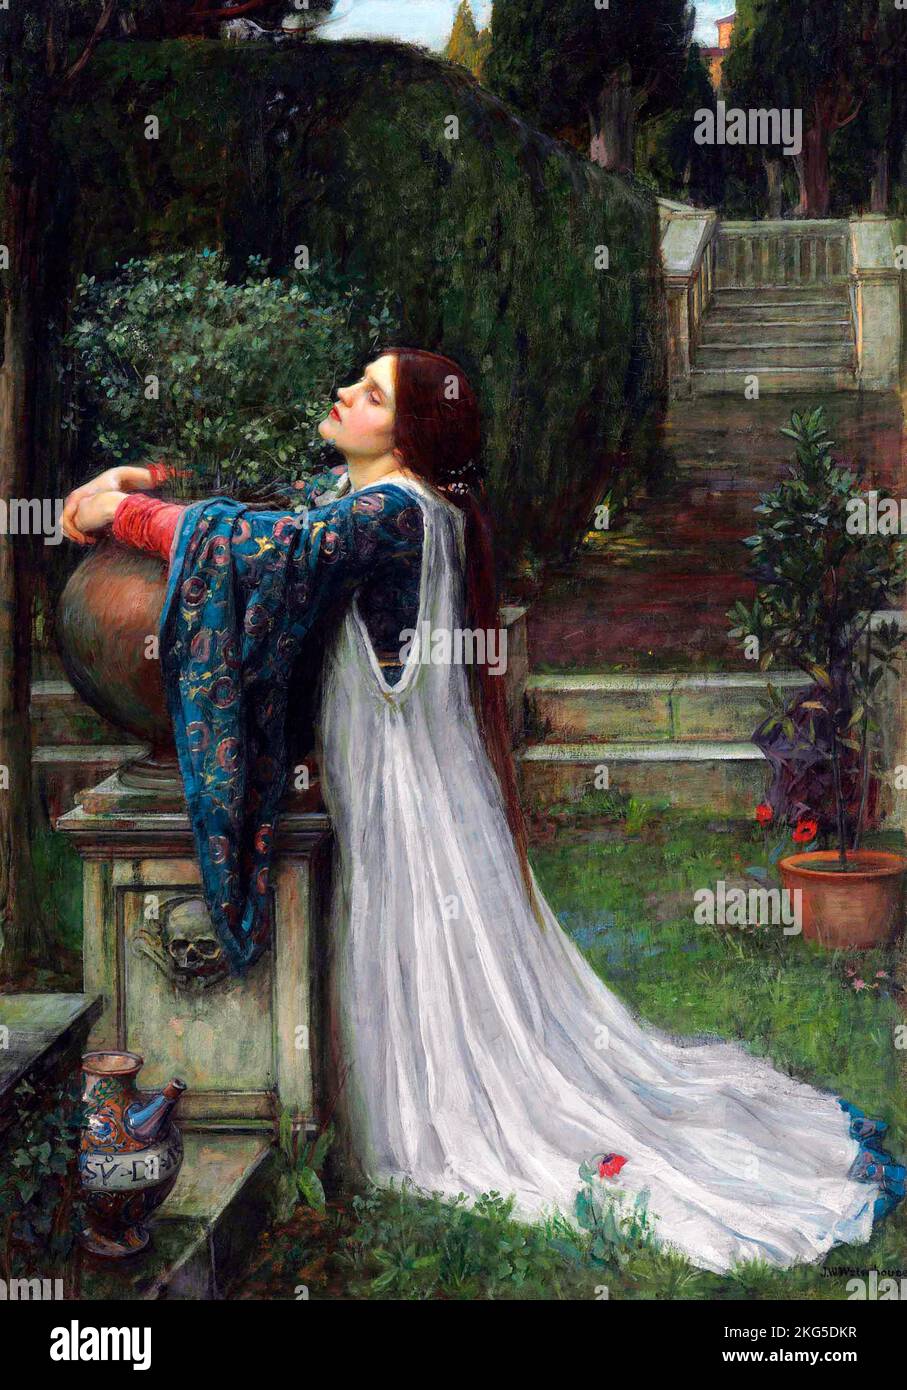 Isabella and the pot of basil 1907, Painting by John William Waterhouse Stock Photo